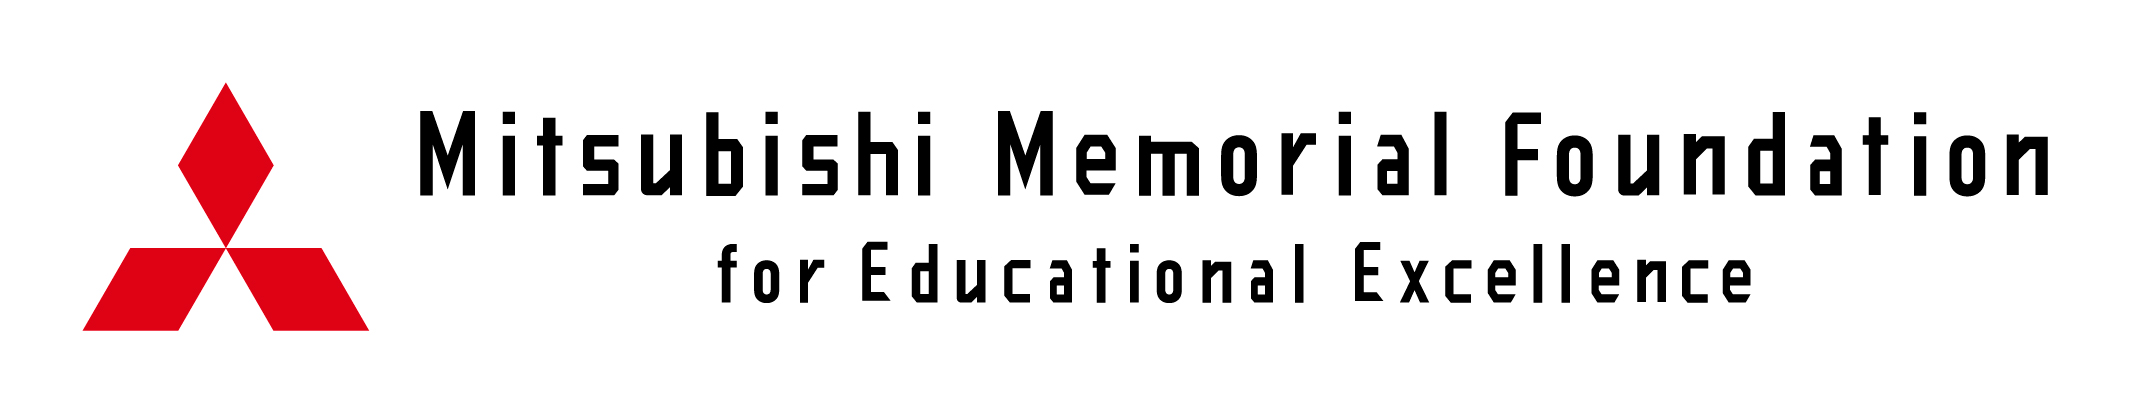 Mitsubishi Memorial Foundation for Educational Excellence